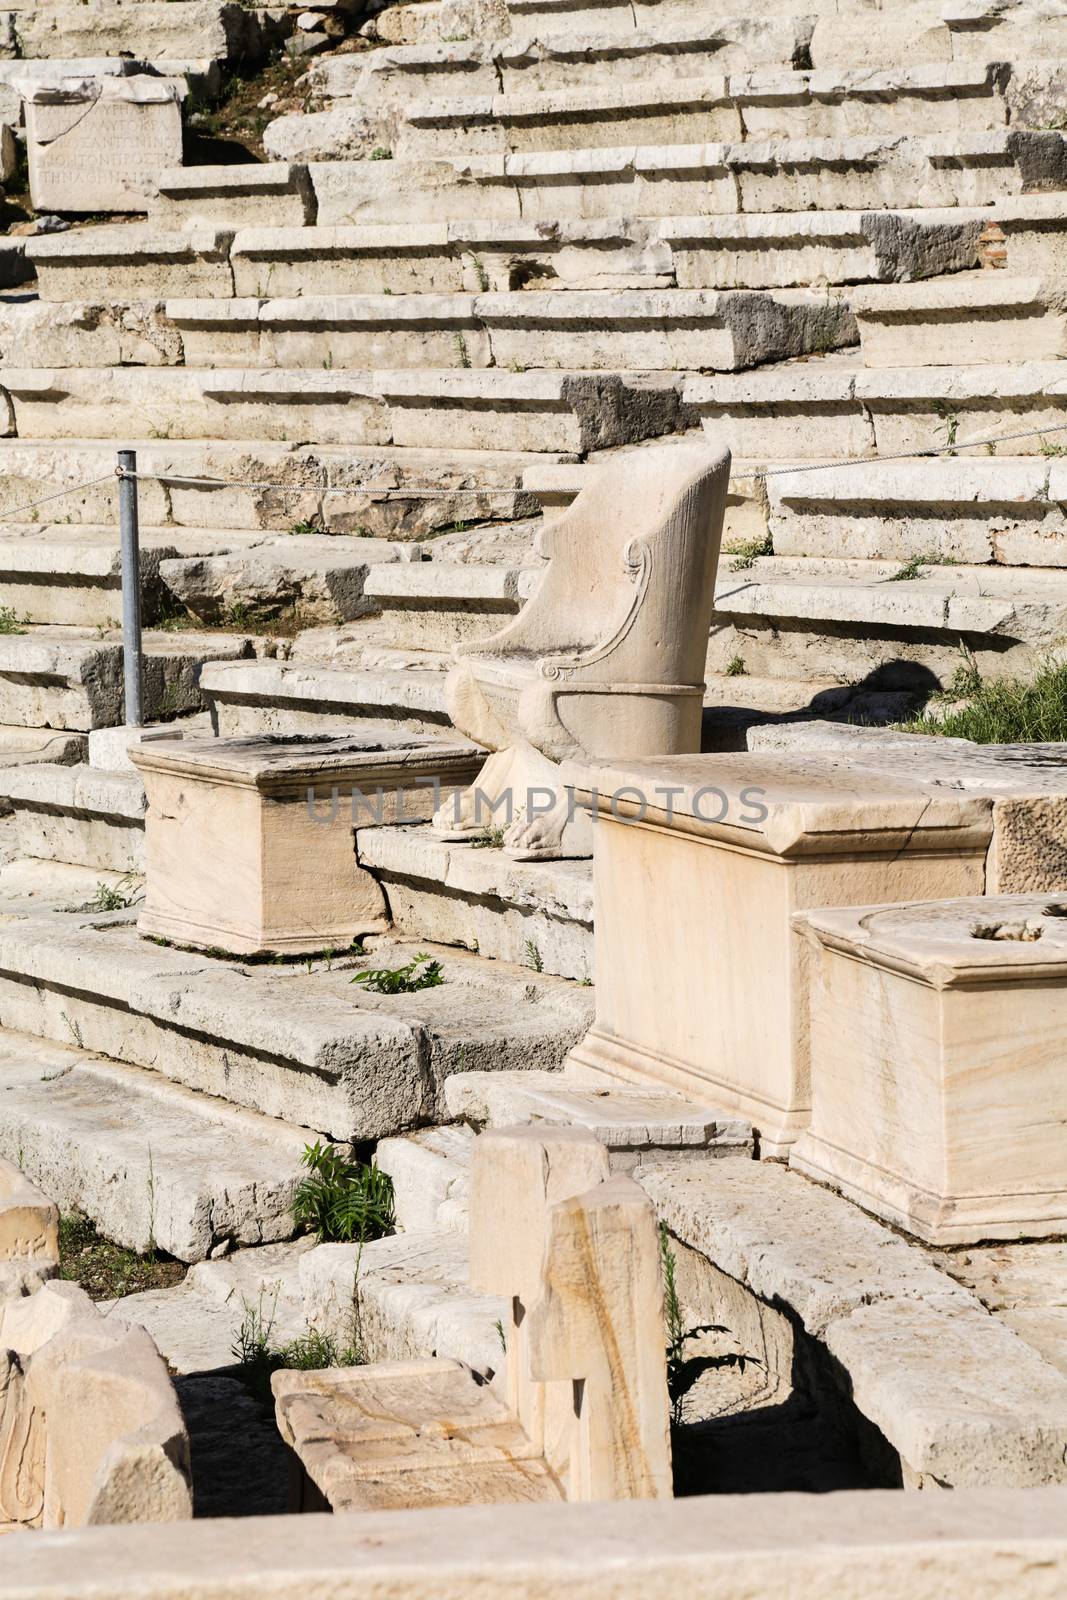 Theatre of Dionysus at the Acropolis in Athens, Greece